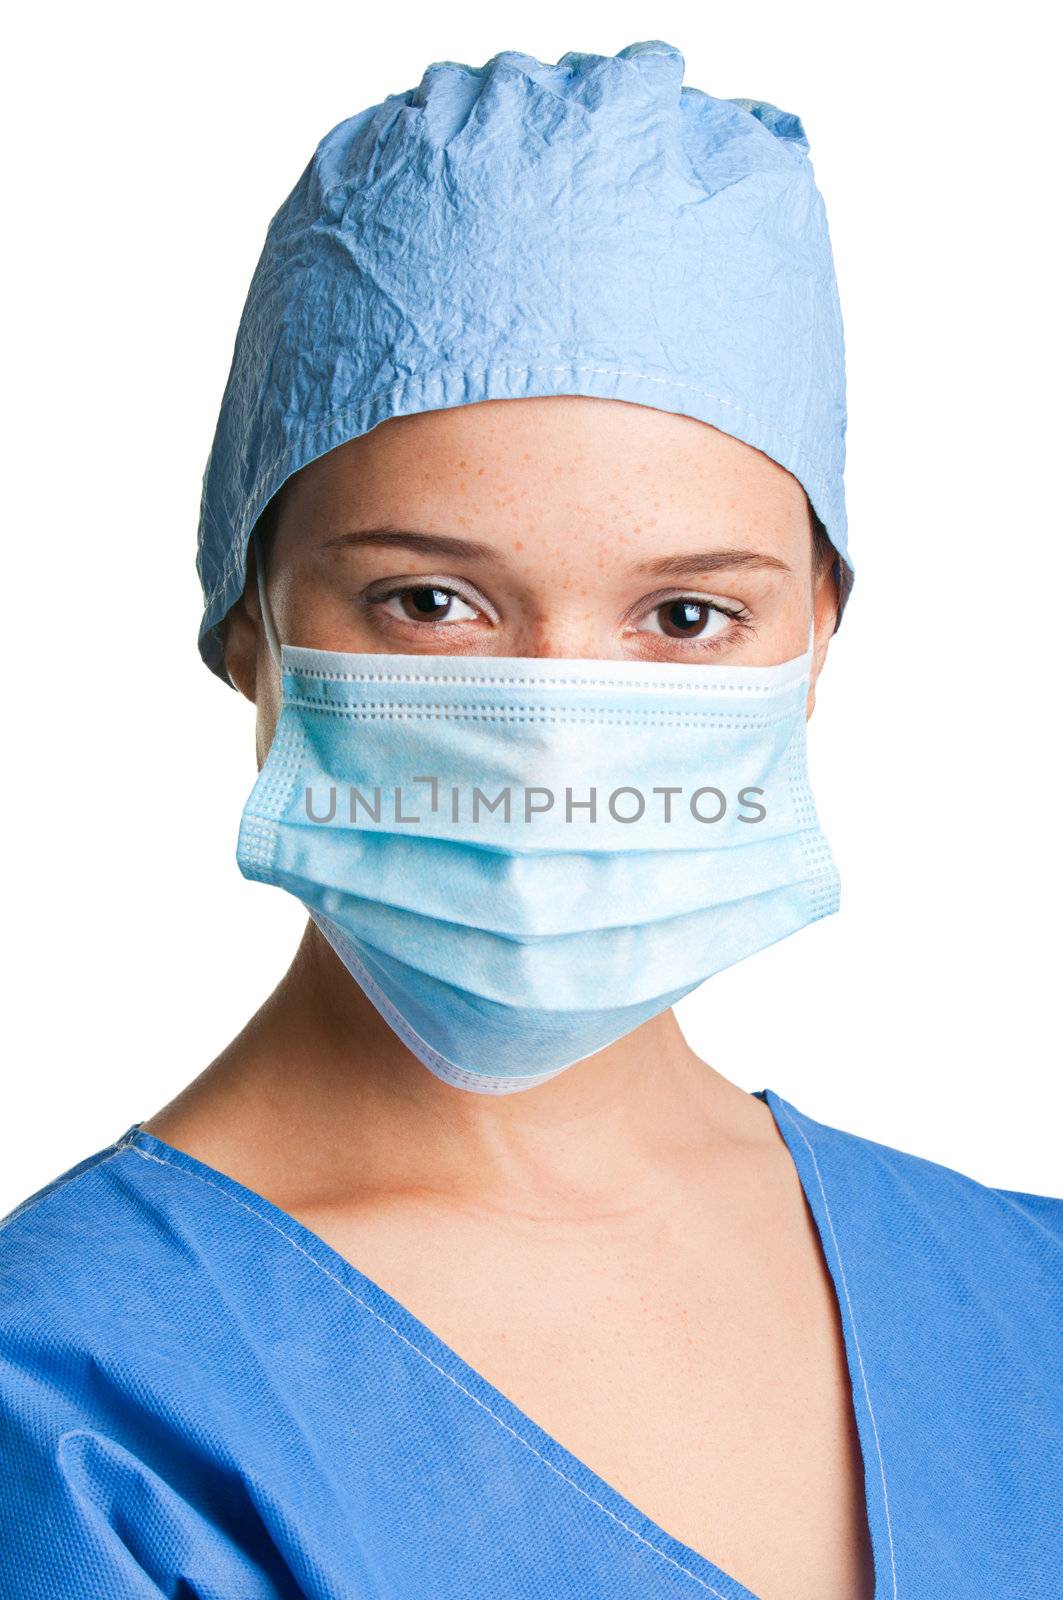 Young female surgeon with scrubs, holding a face mask on a white background